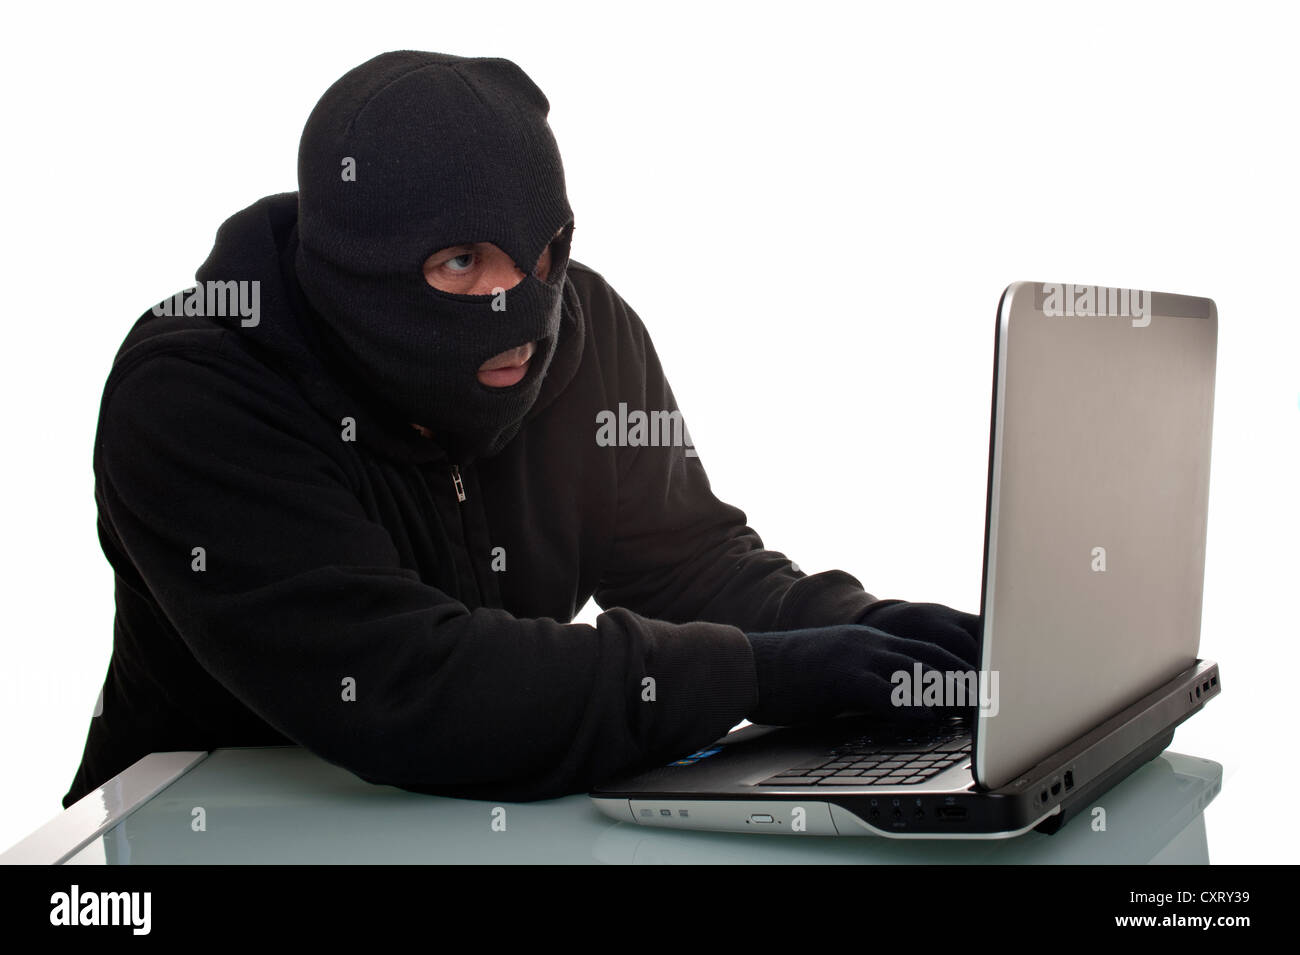 Hacker surfing the internet with a laptop computer, symbolic image for computer hacking, computer or cyber crime, data theft Stock Photo